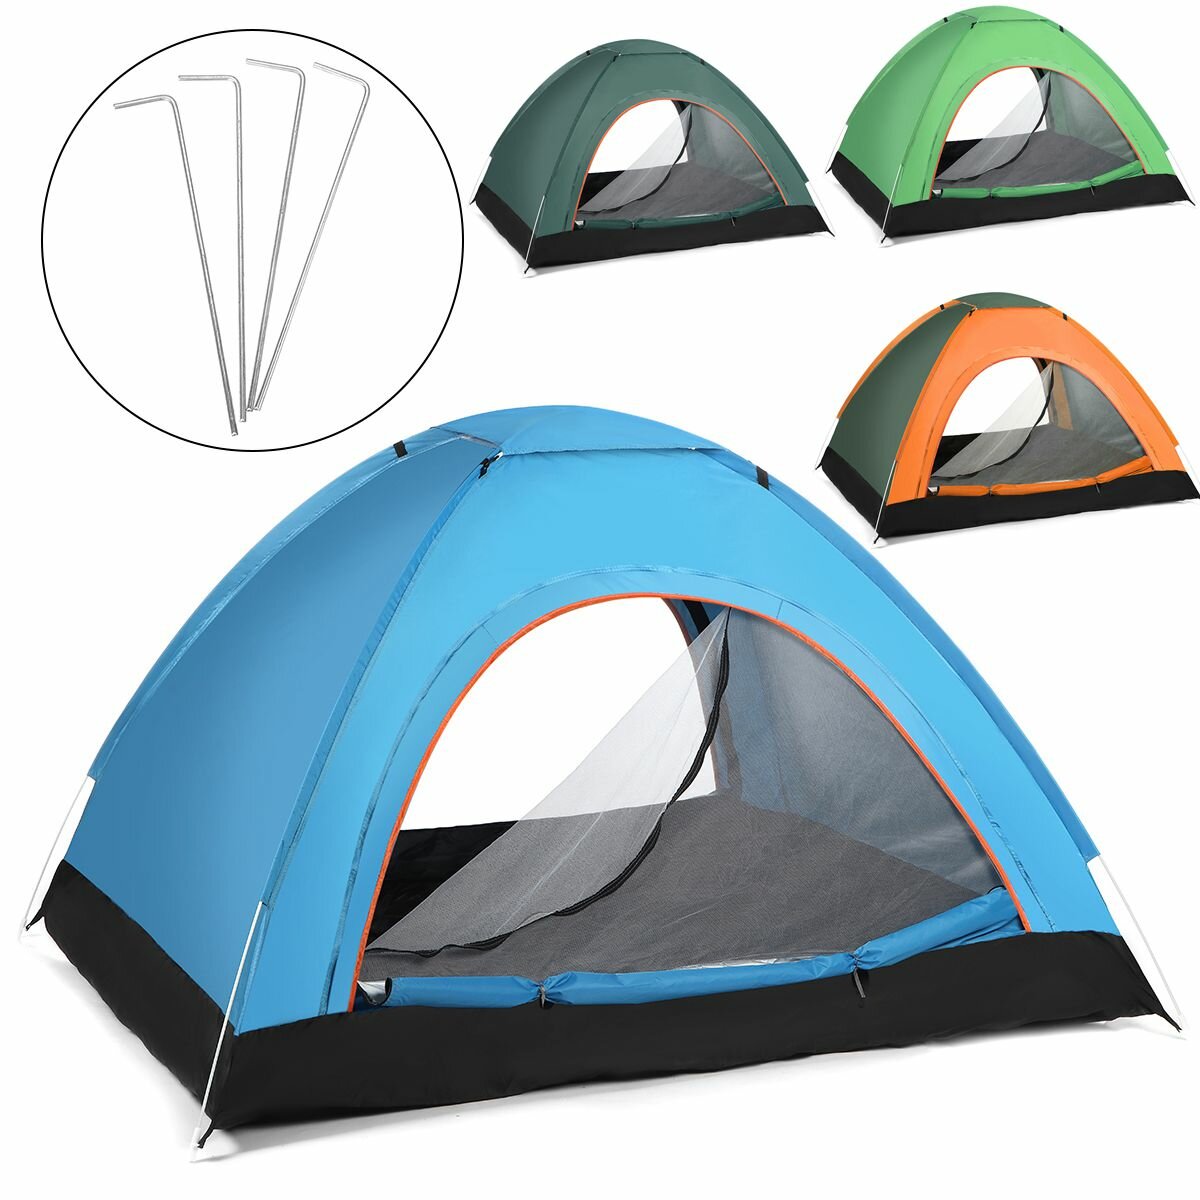 2-3 Person Full Automatic Anti-UV Windproof Waterproof Camping Tent Outdoor Traveling Hiking Beach Tent